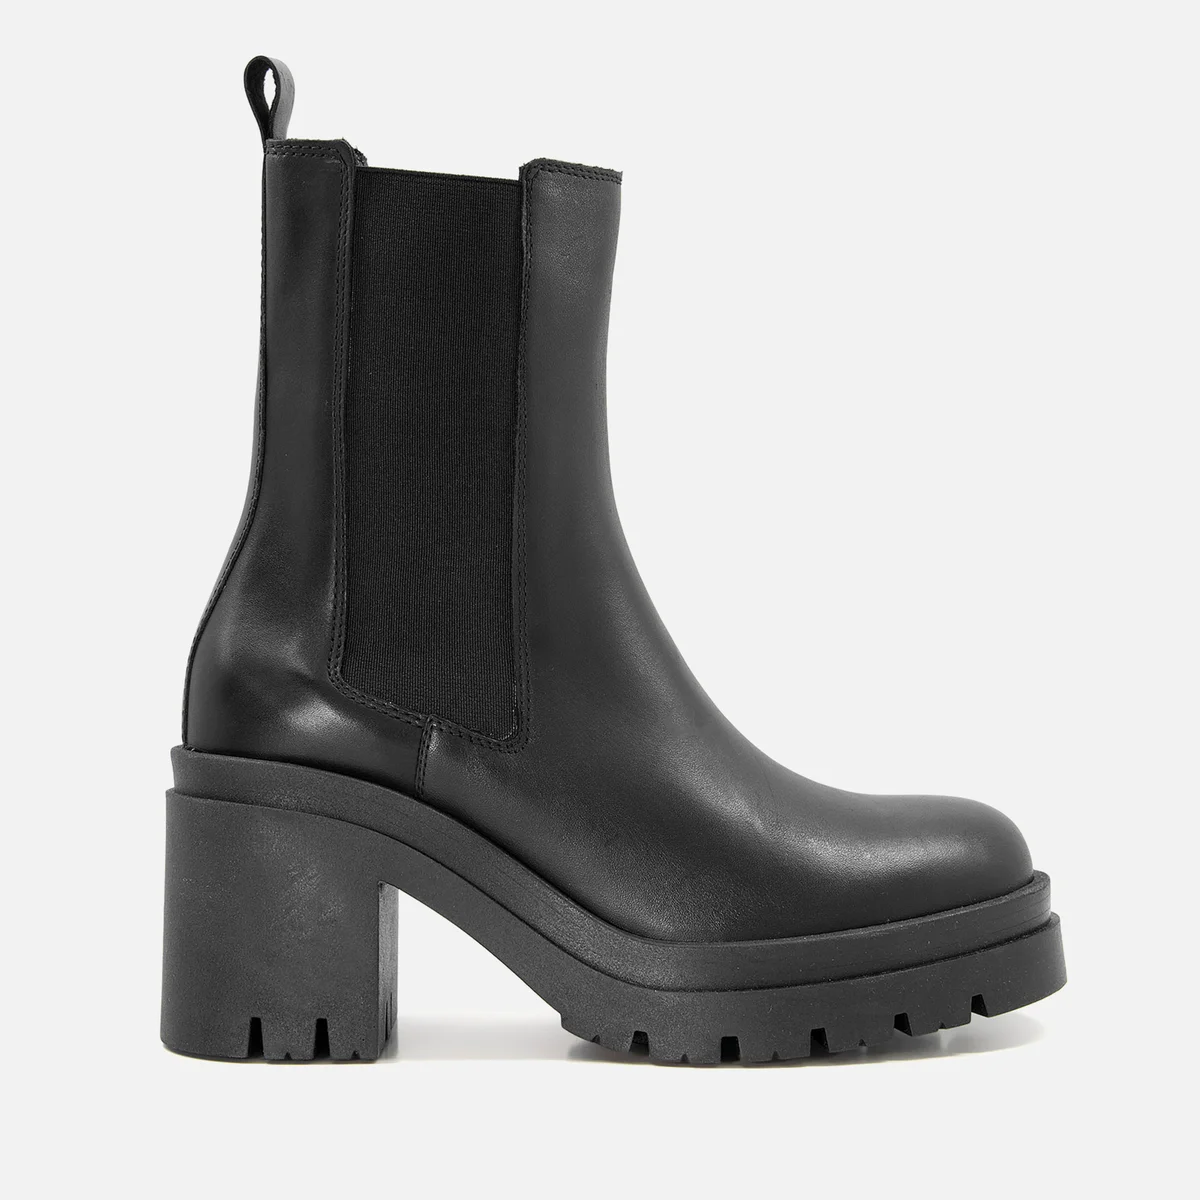 Dune Prized Leather Heeled Chelsea Boots Image 1